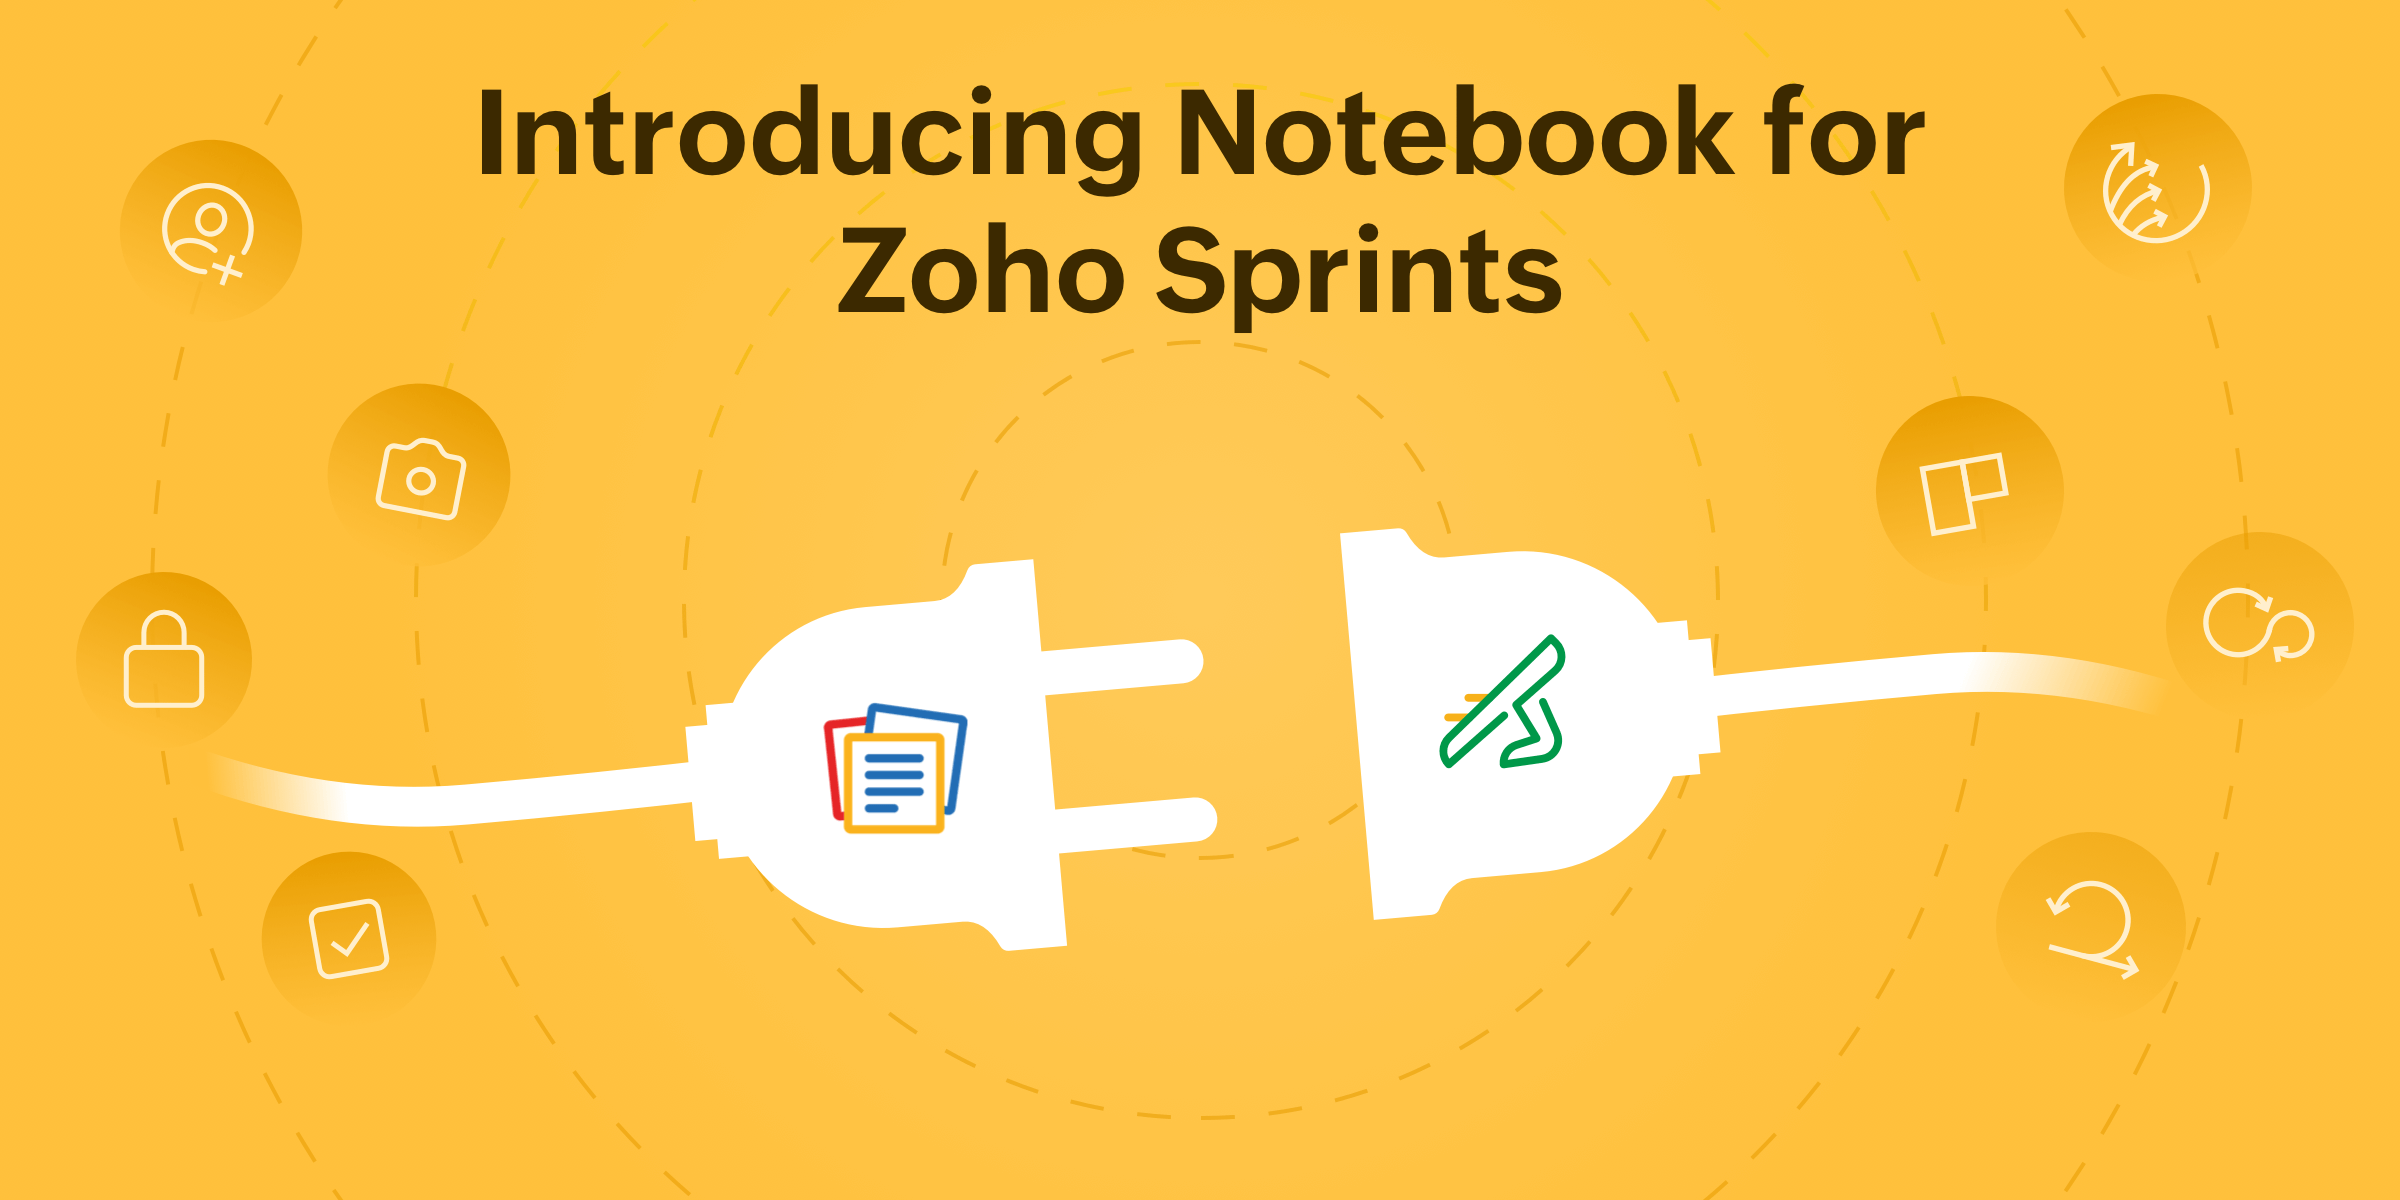 Introducing Notebook for Zoho Sprints